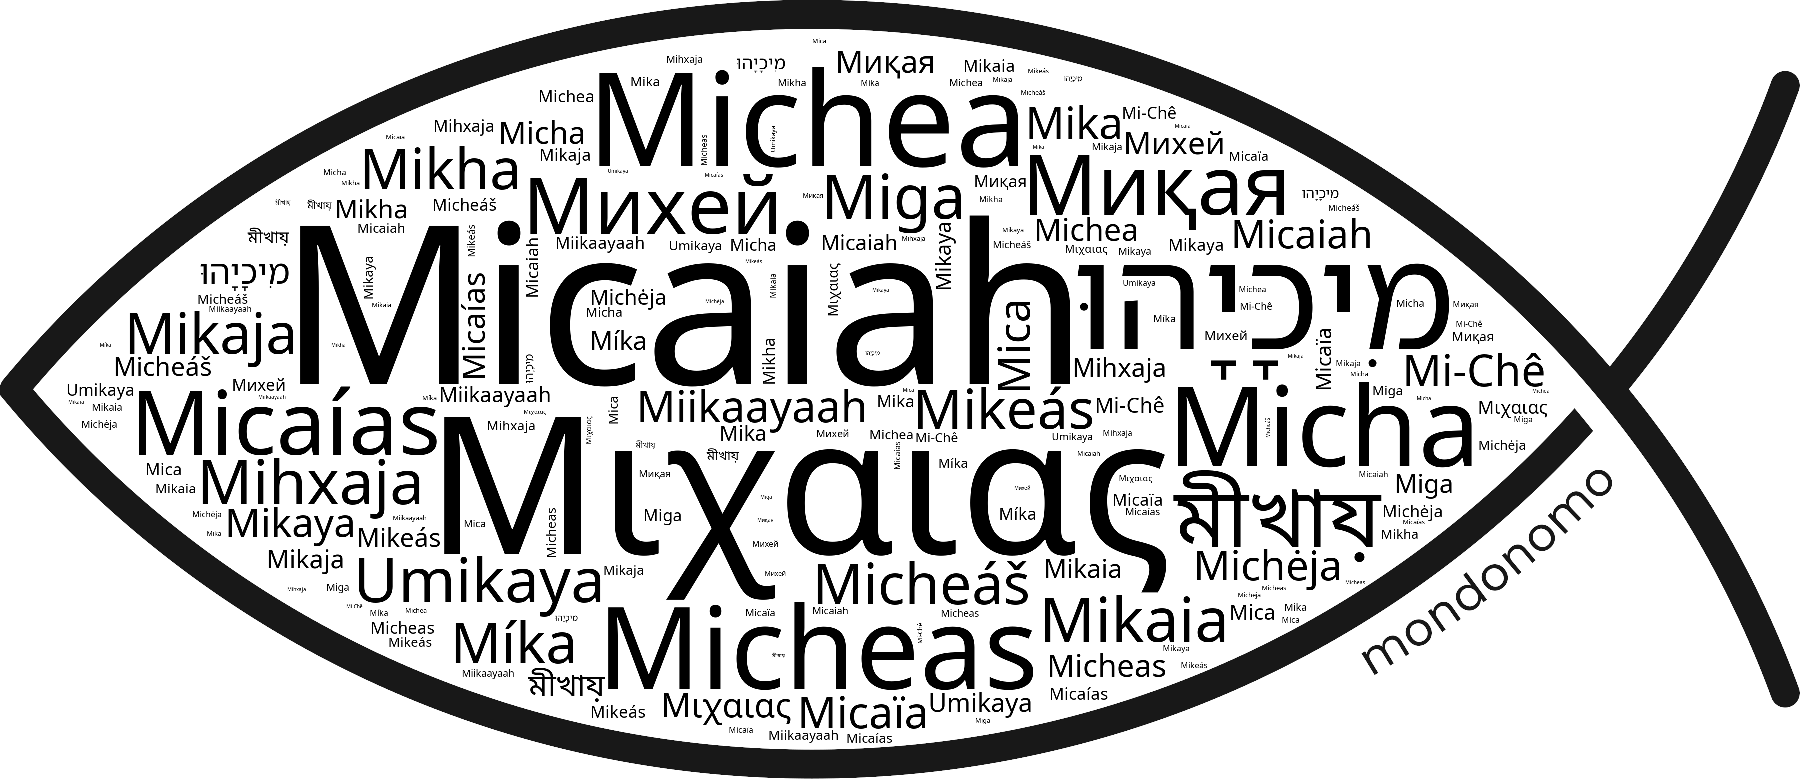 Name Micaiah in the world's Bibles